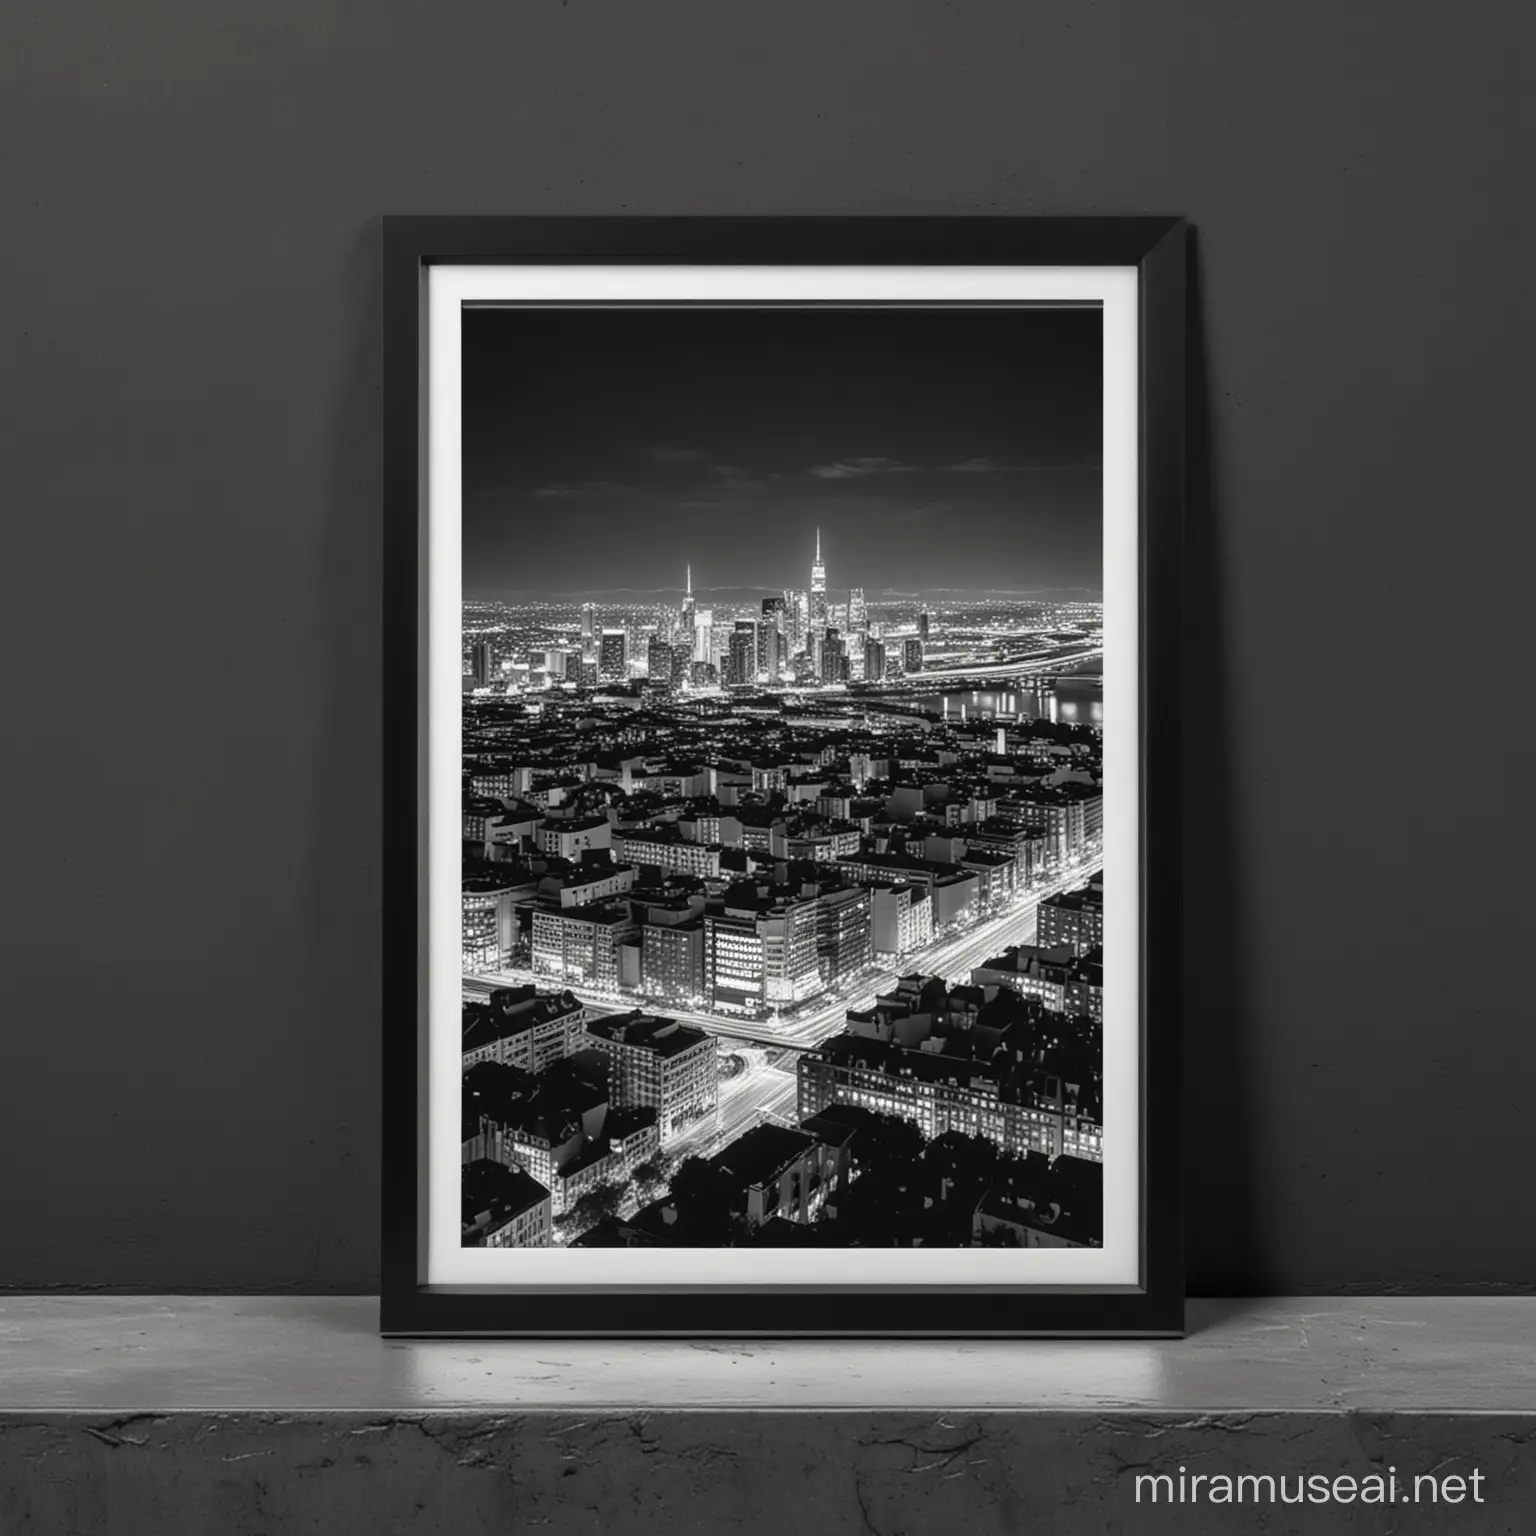 small A4 black frame mockup in the outside with a night city view